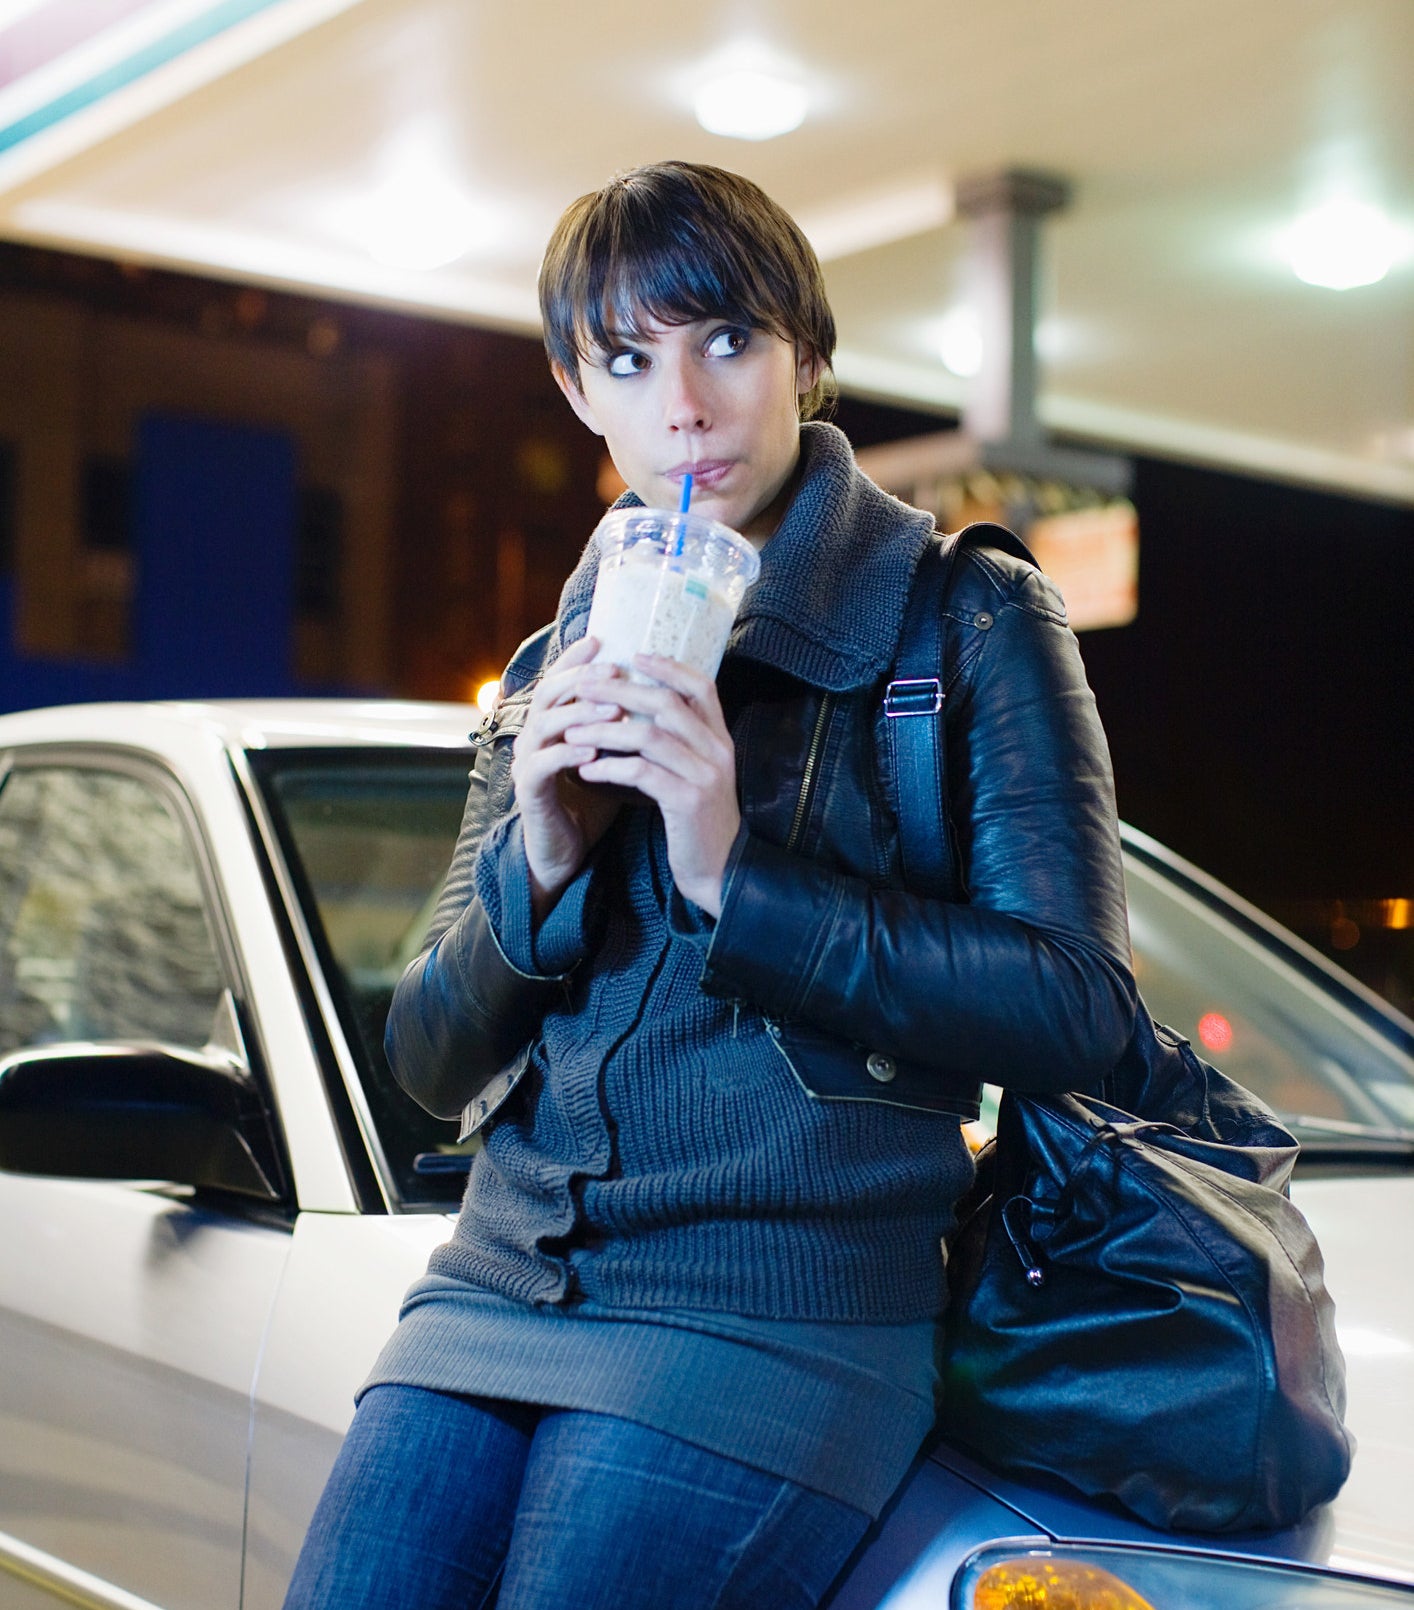 A person drinking a beverage while leaning on a car